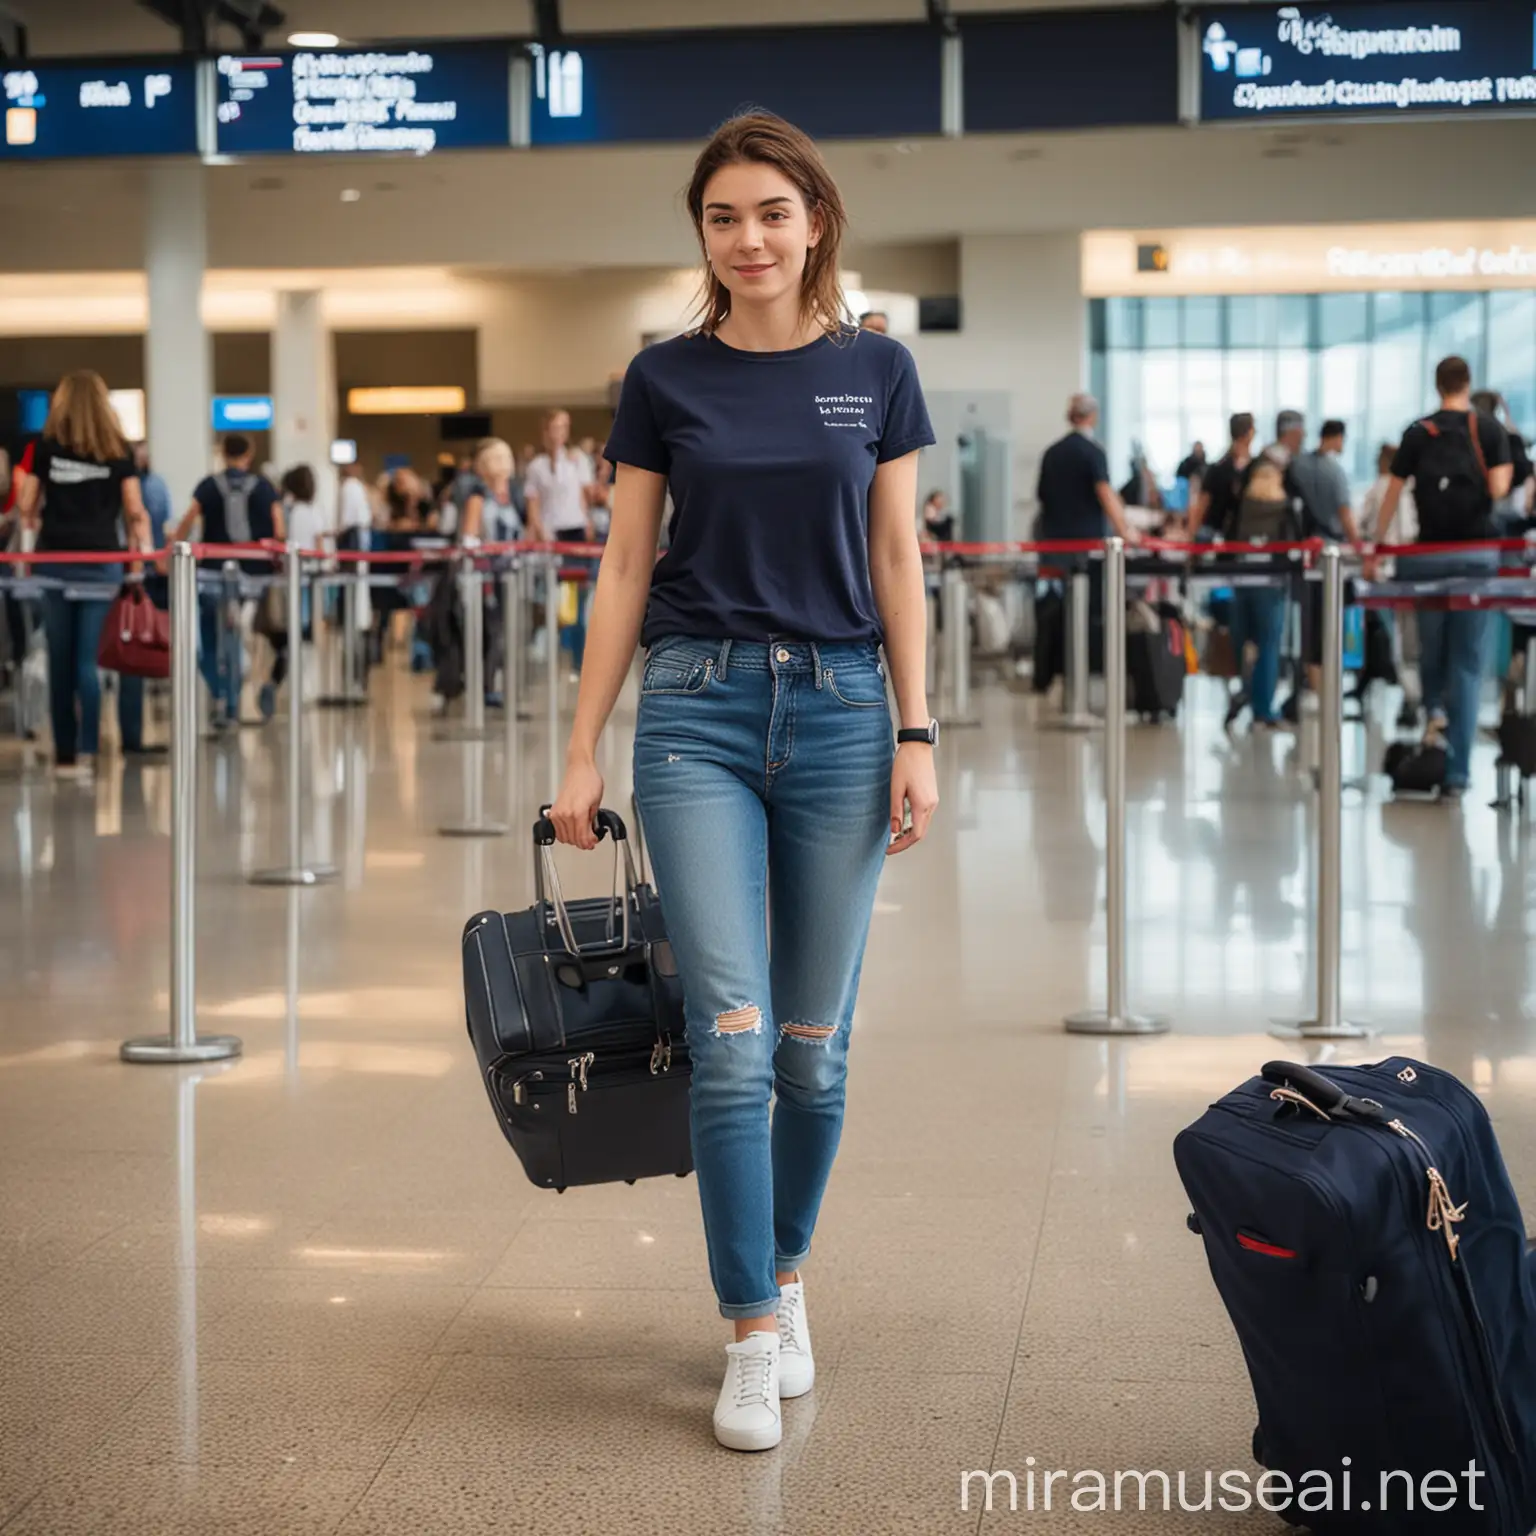 Woman with Hand Luggage in Airport Arrivals Hall